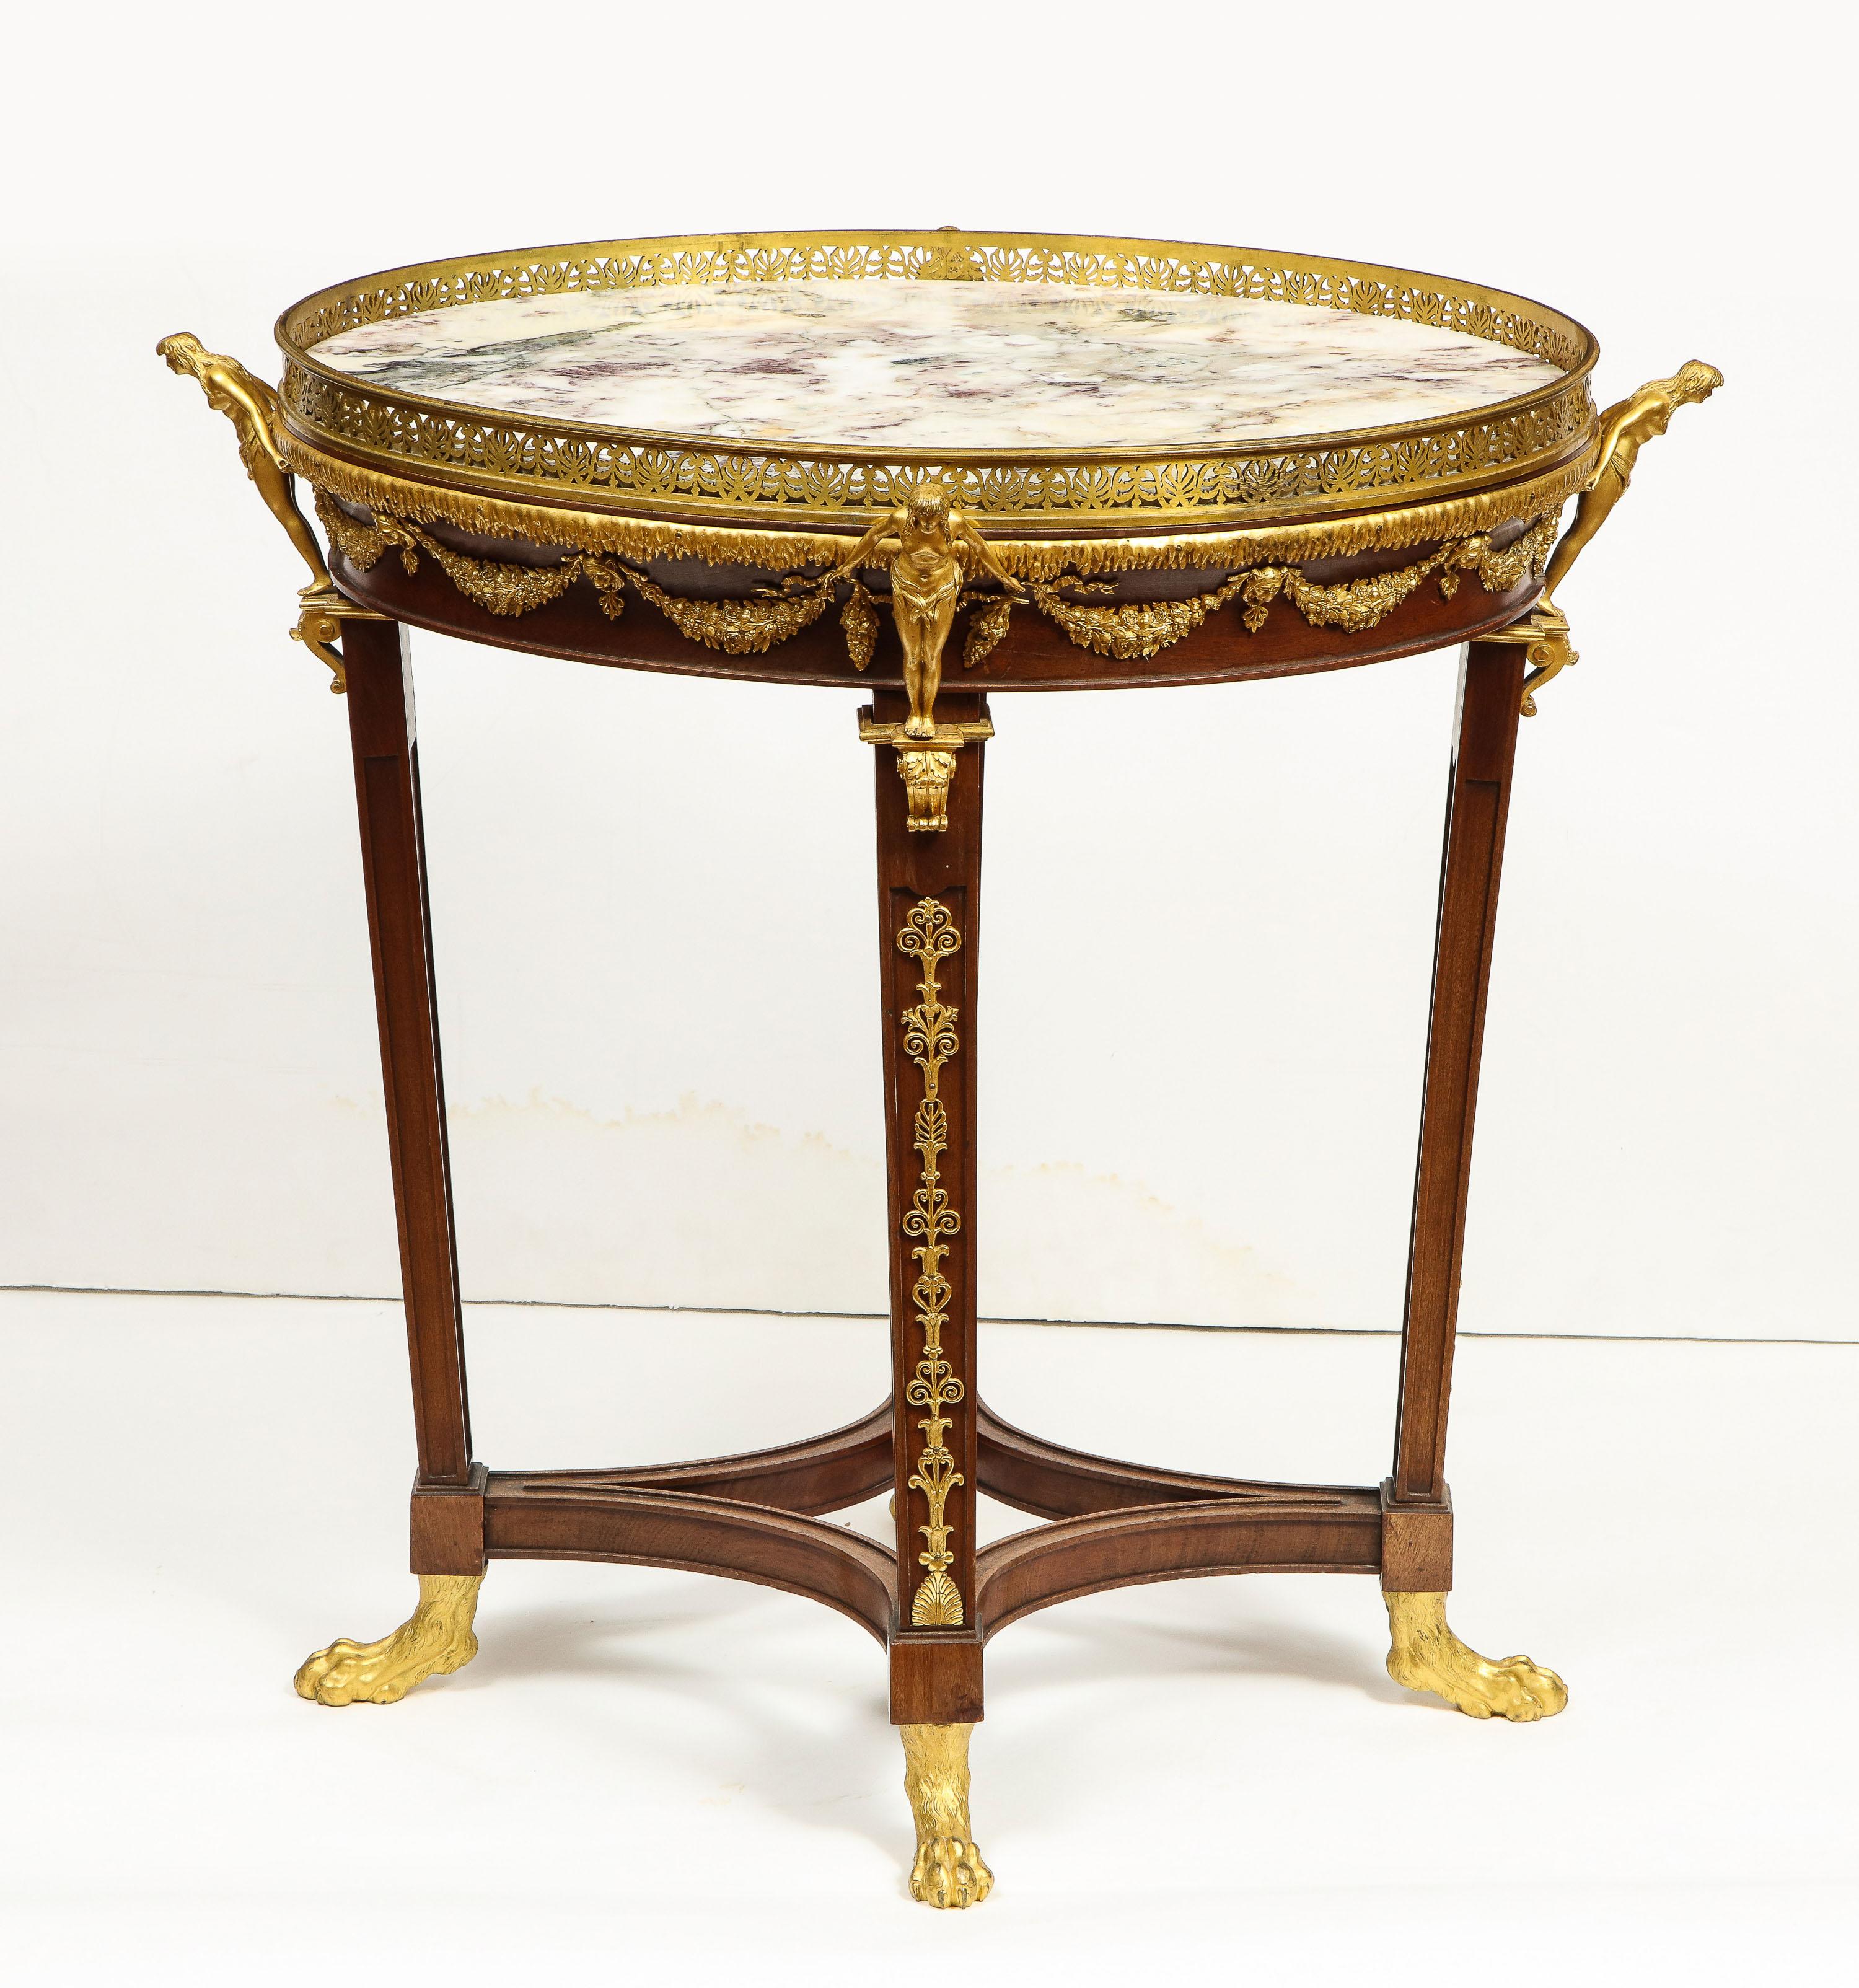 Extremely Fine Russian Empire Ormolu Mounted Mahogany Center Table In Good Condition For Sale In New York, NY